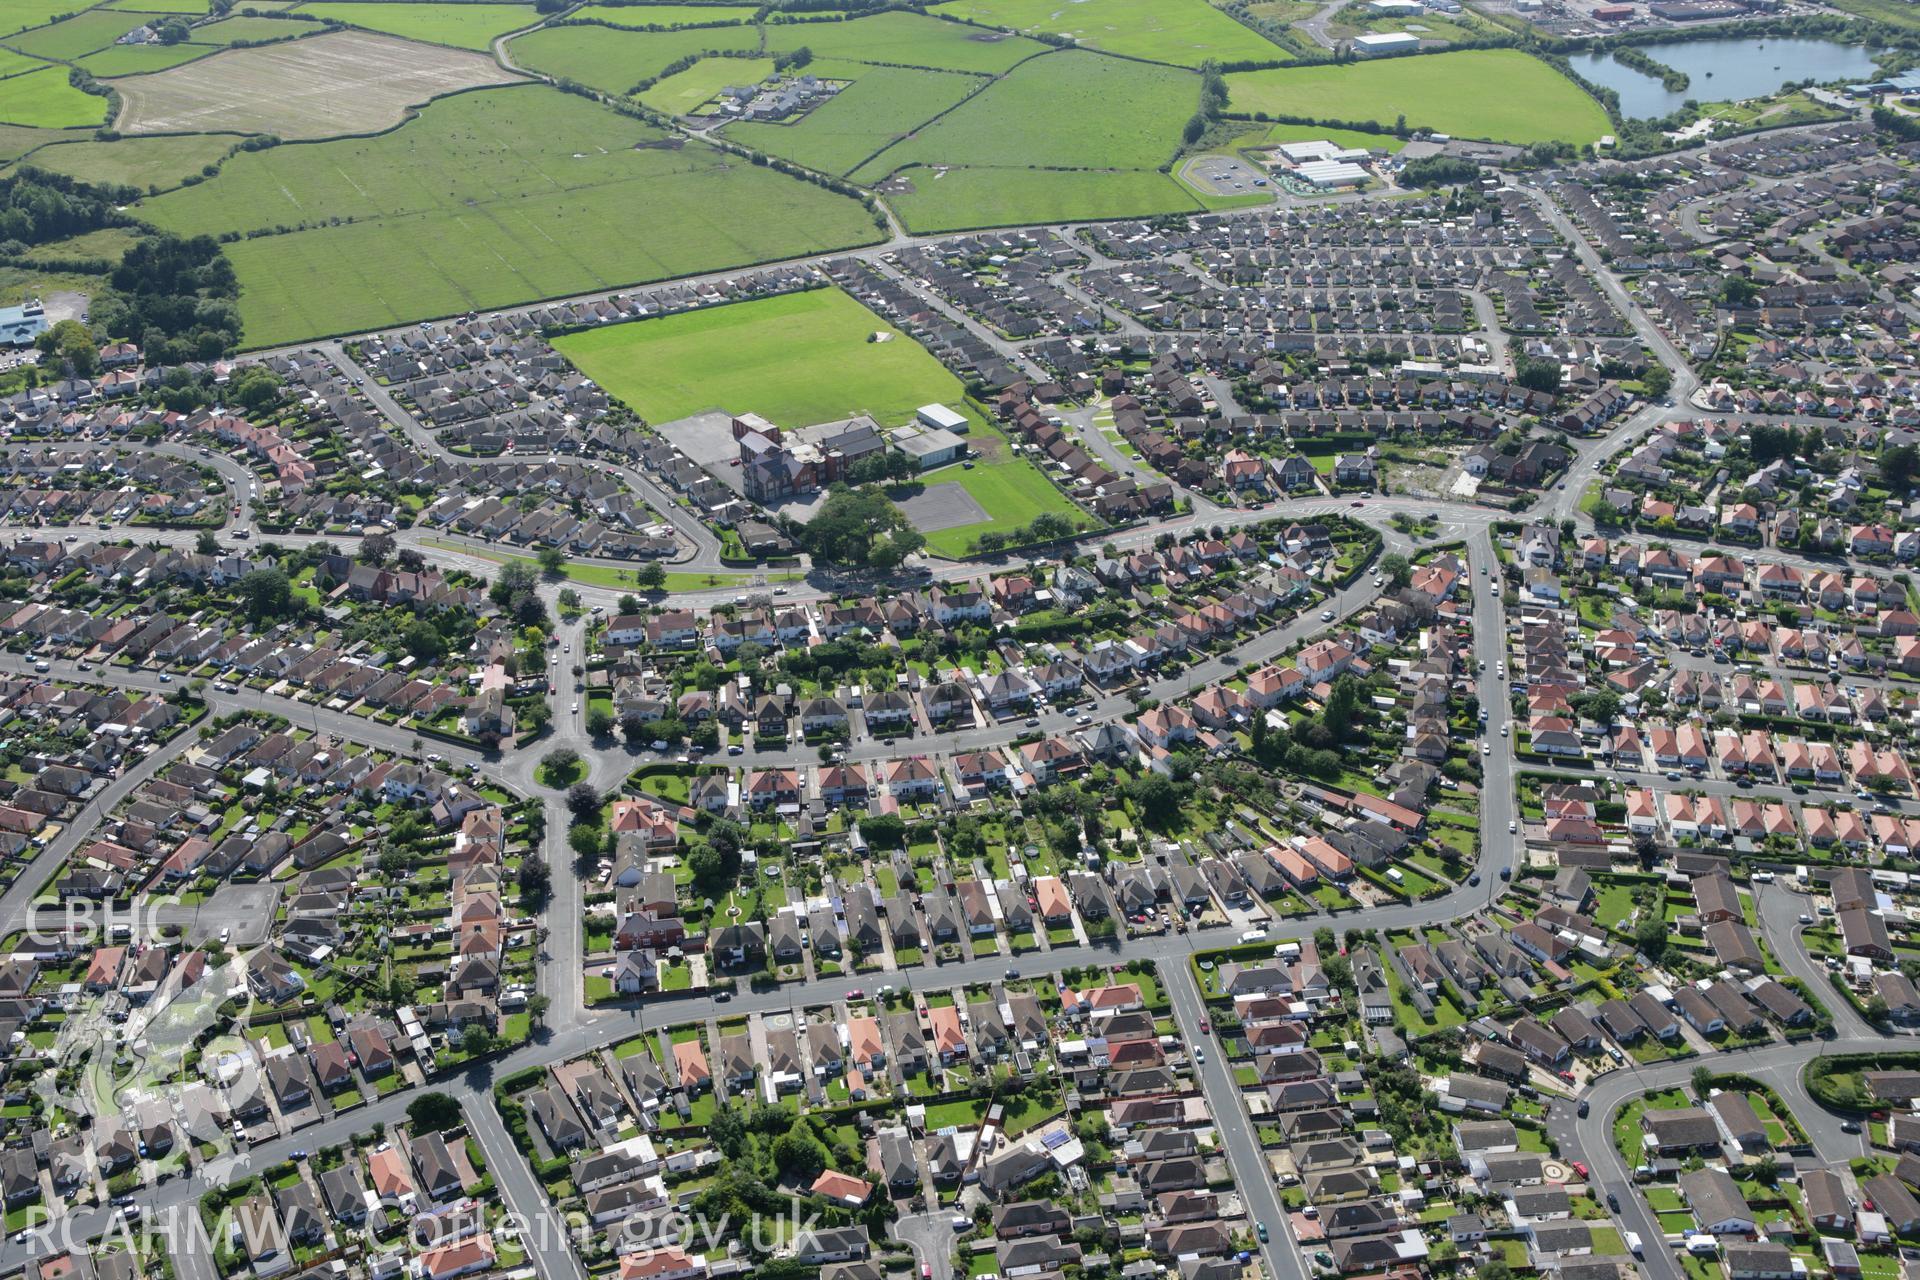 RCAHMW colour oblique aerial photograph of Rhyl looking south-west. Taken on 31 July 2007 by Toby Driver